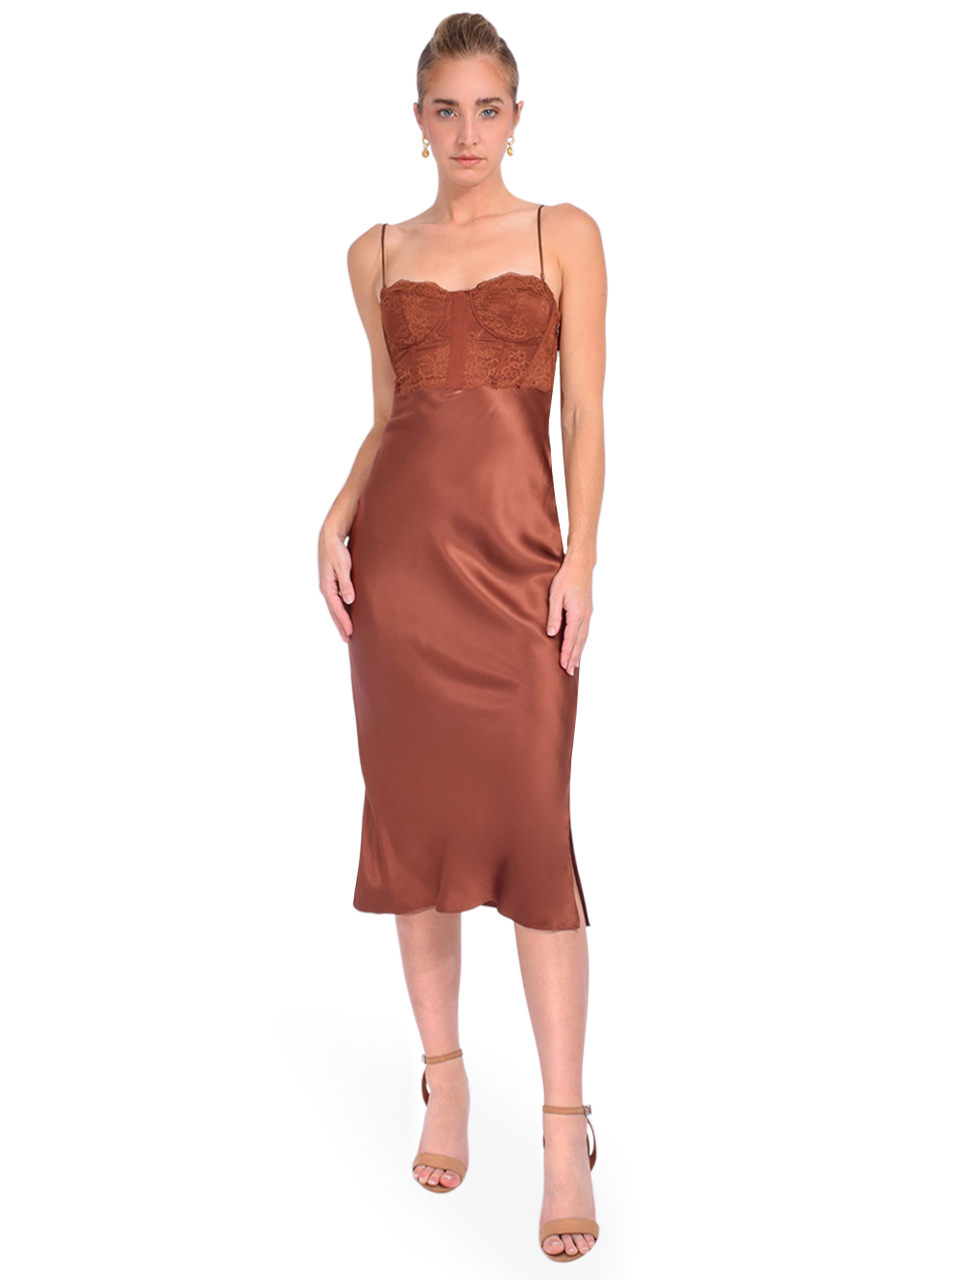 Cami NYC Lara Lace Bustier Slip Dress in Coffee Brown Front View 1